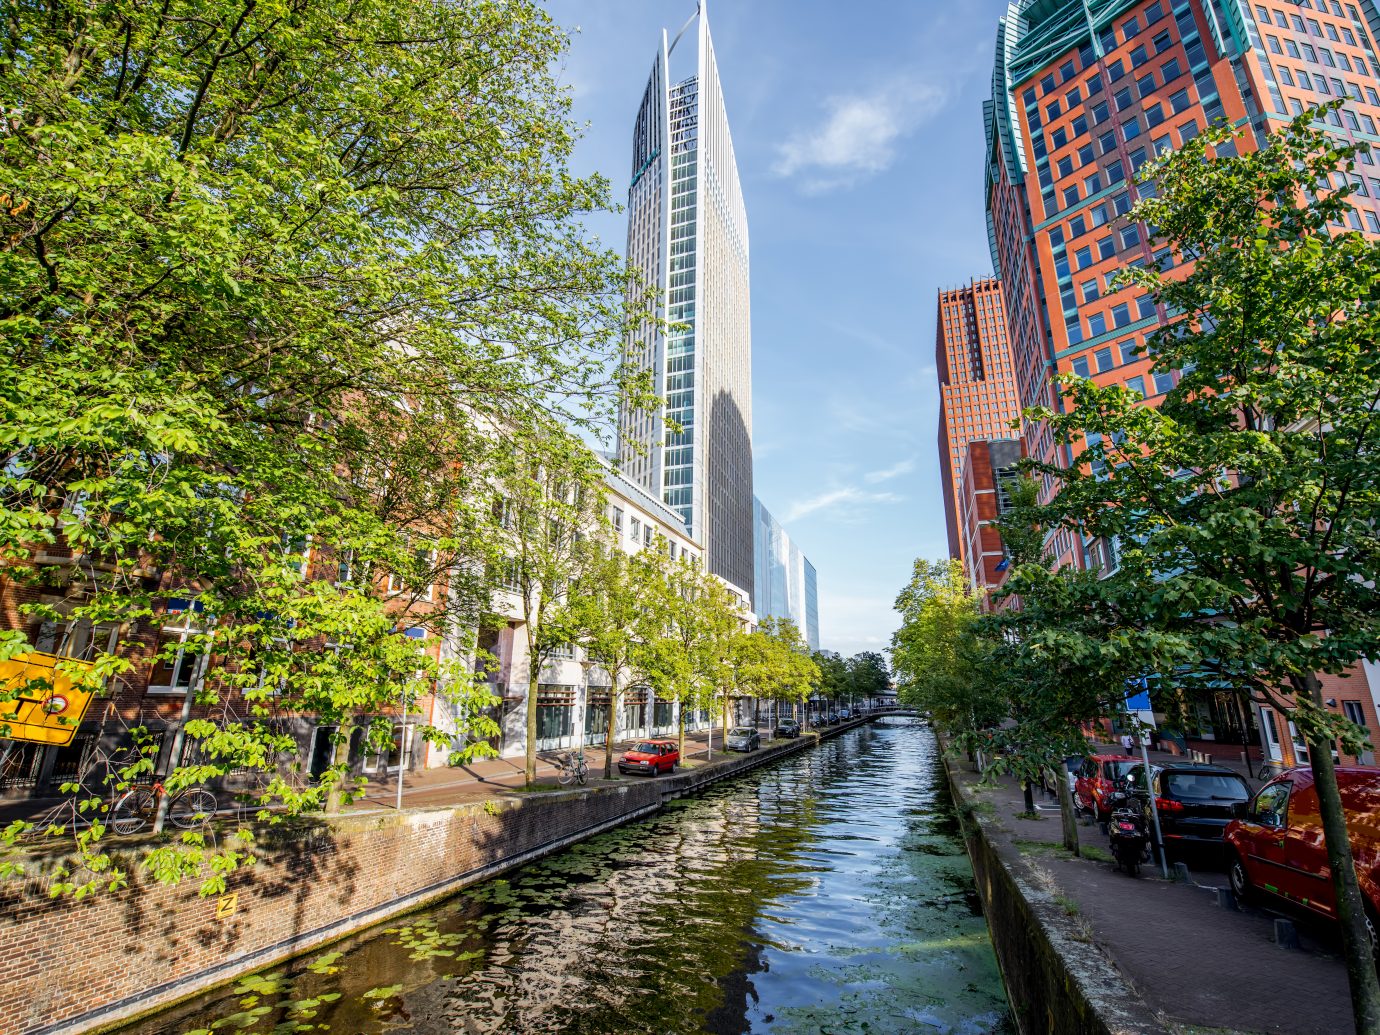 View on the water channel and beautiful skyscrapers in Haag city, Netherlands